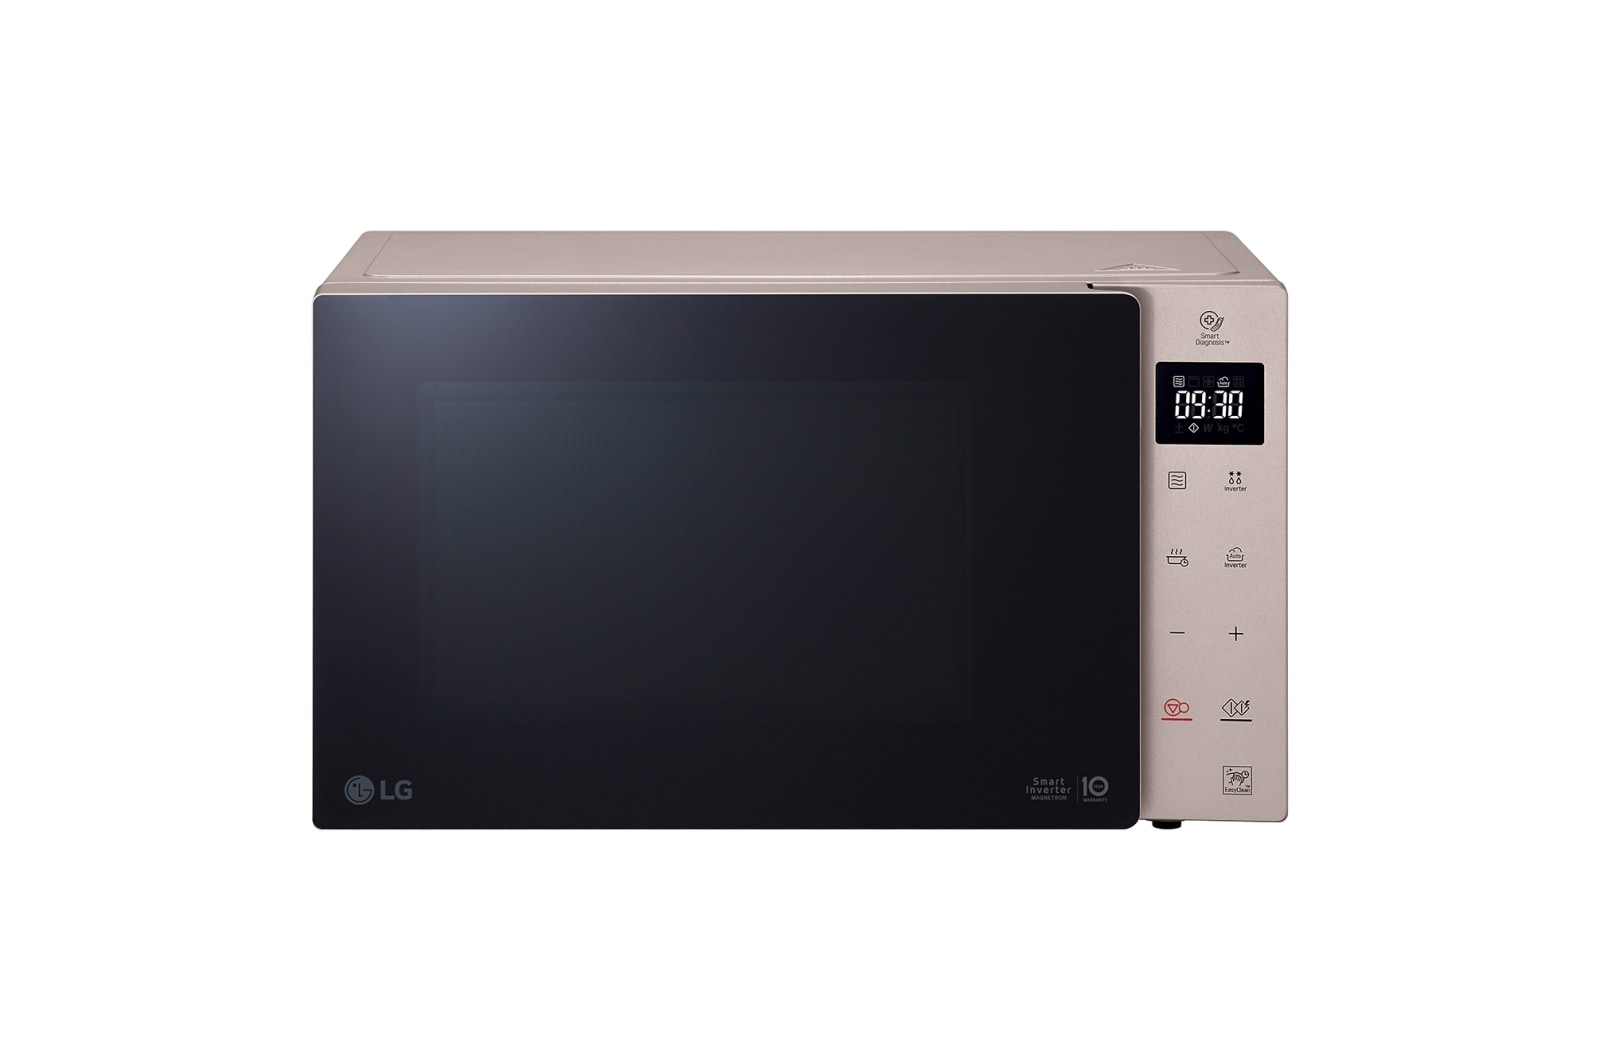 LG Microwave oven Solo LG-MS2535GISH with Smart Inverter technology, 25 liters, MS2535GISH